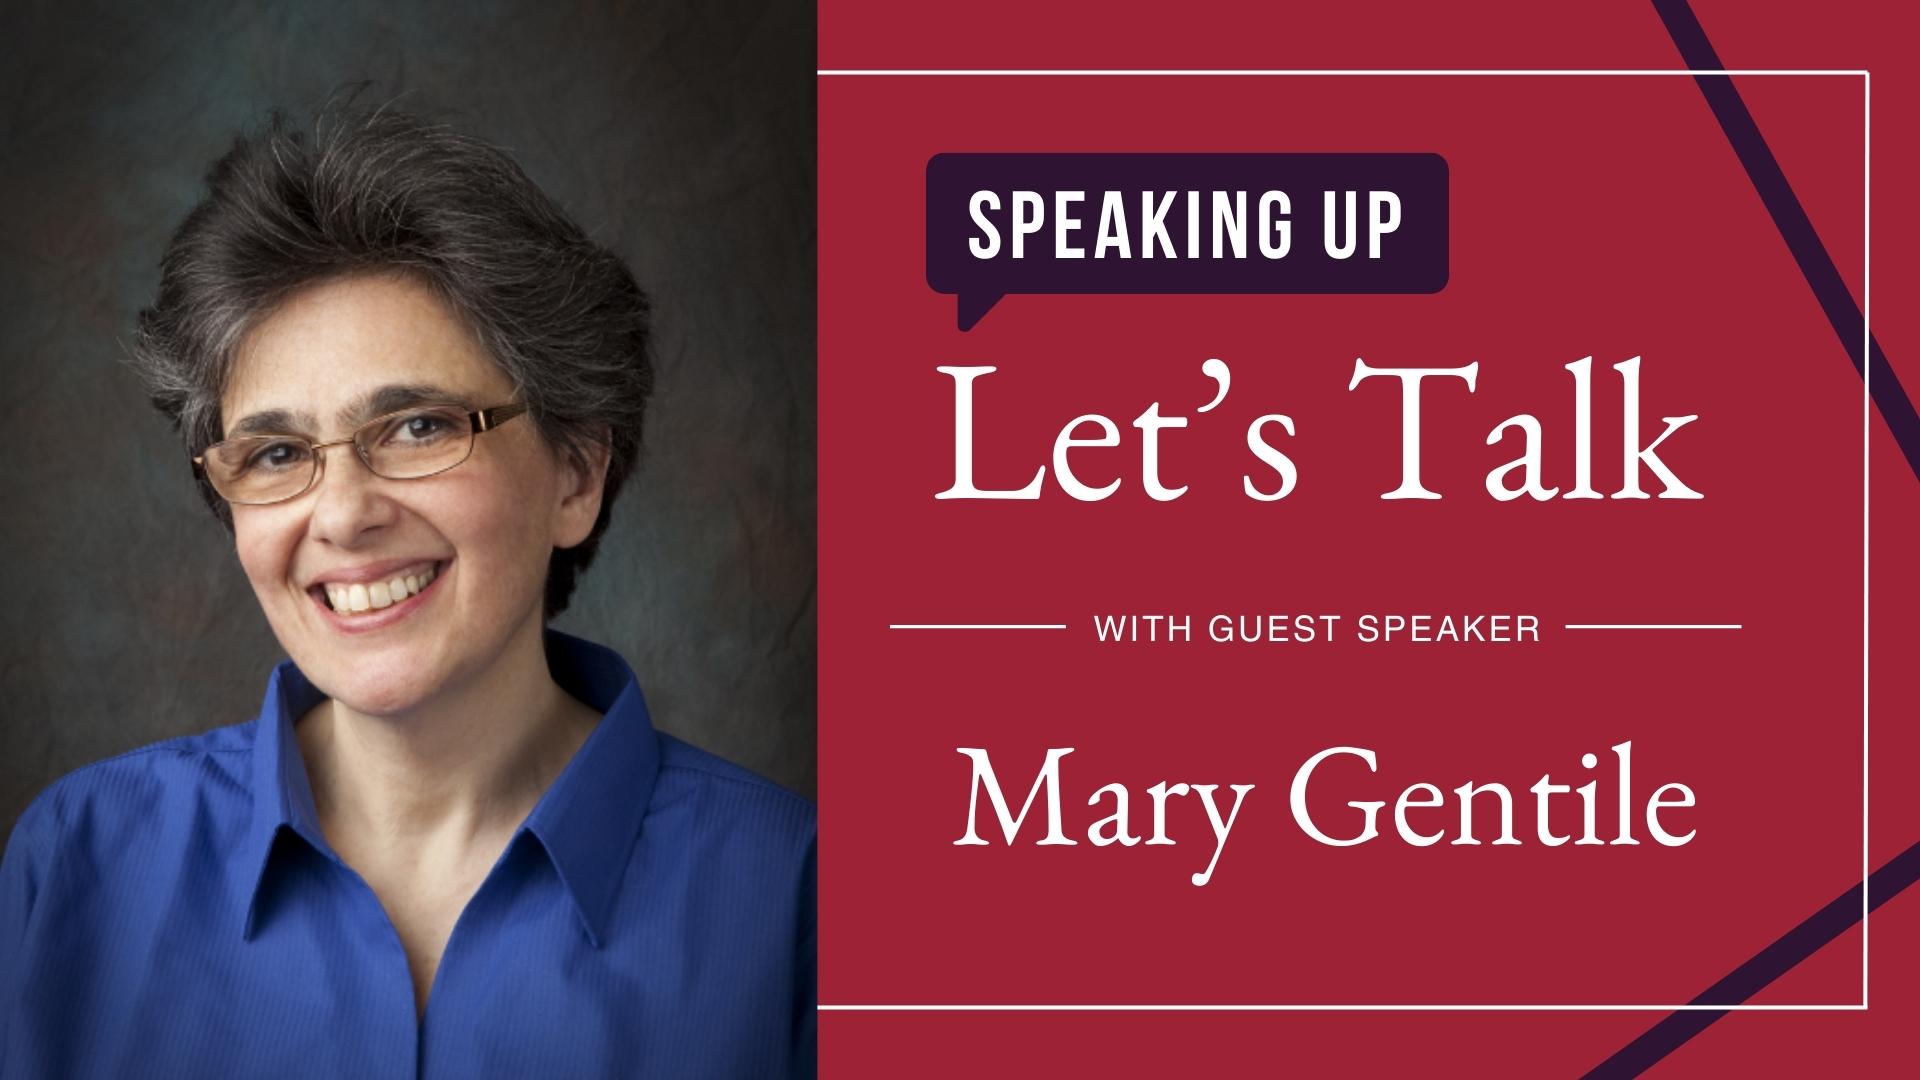 Mary Gentile - Let's Talk about Speaking Up guest speaker